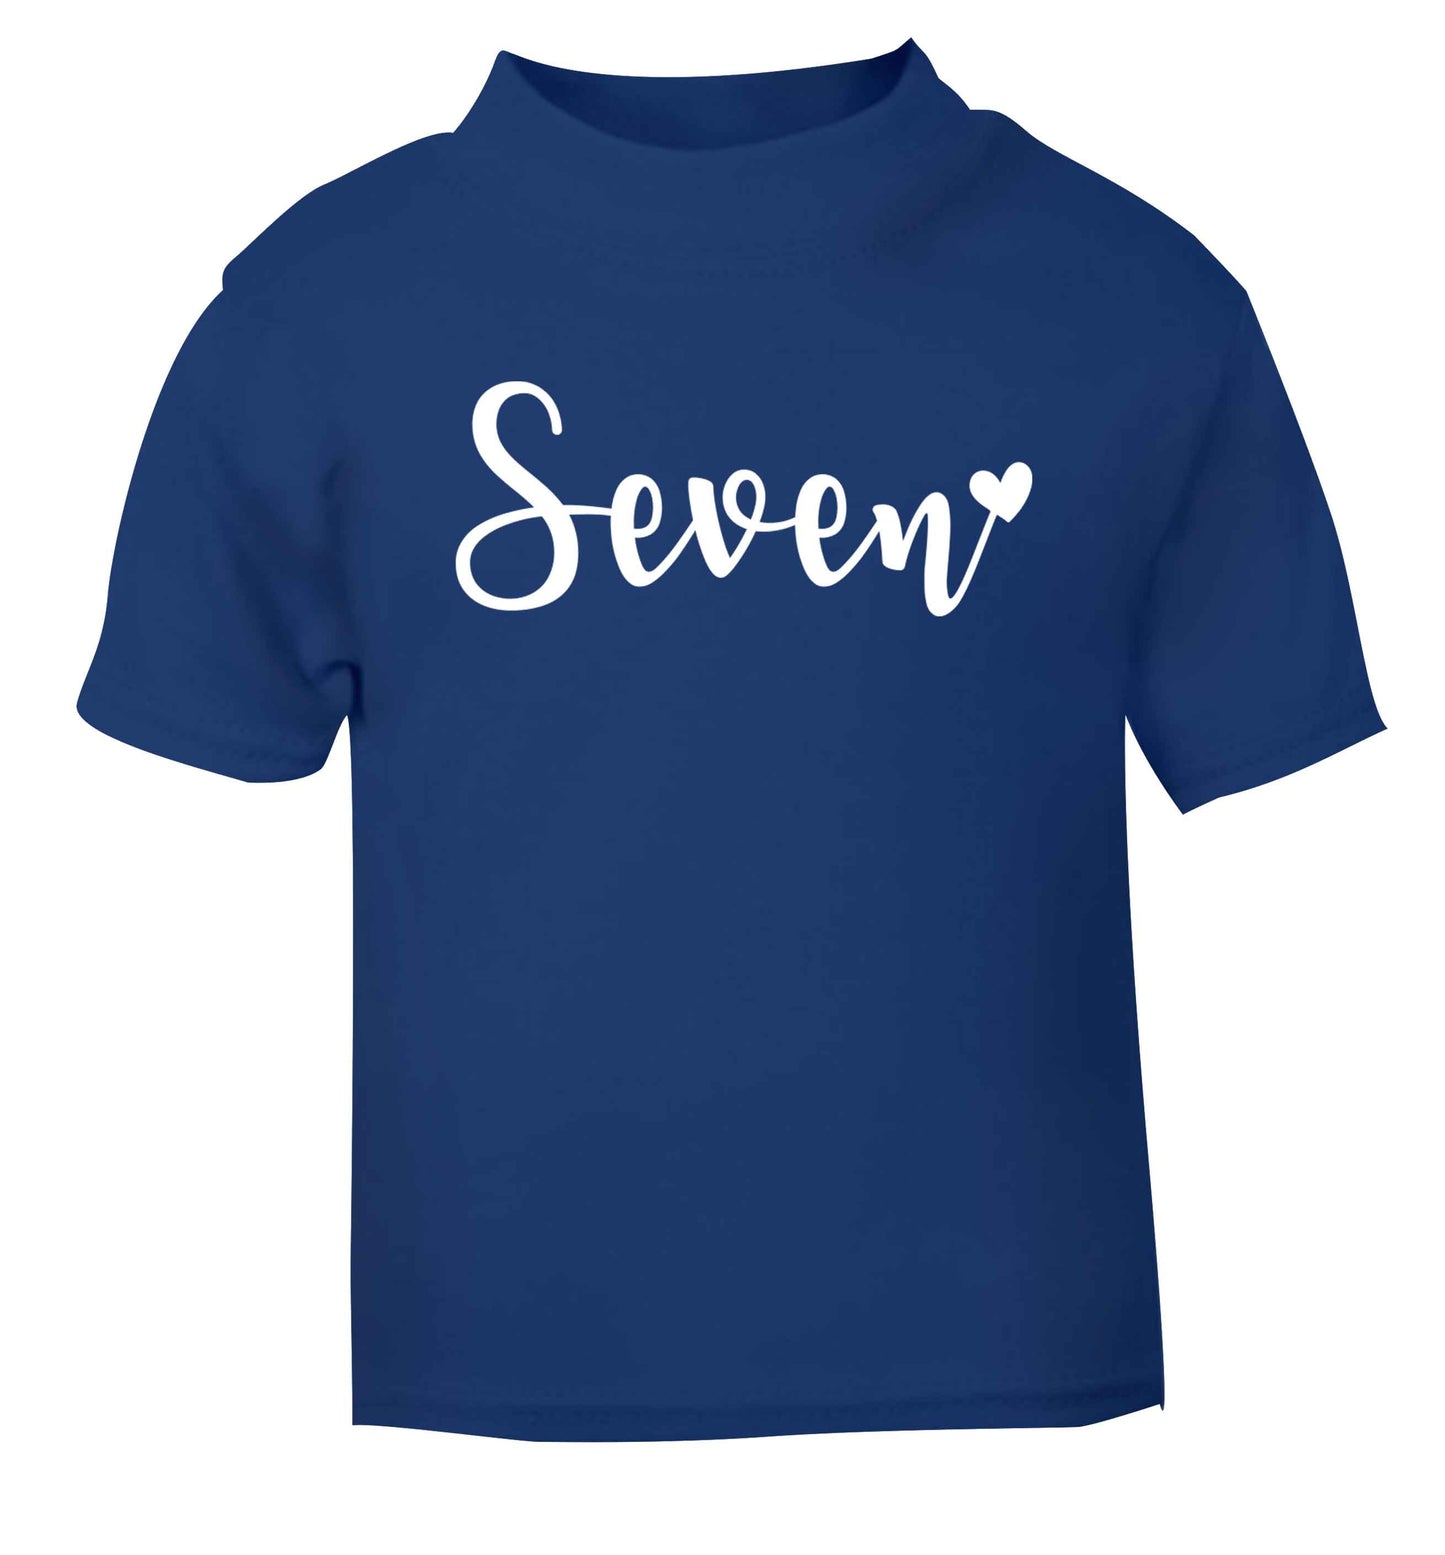 Seven and heart blue baby toddler Tshirt 2 Years